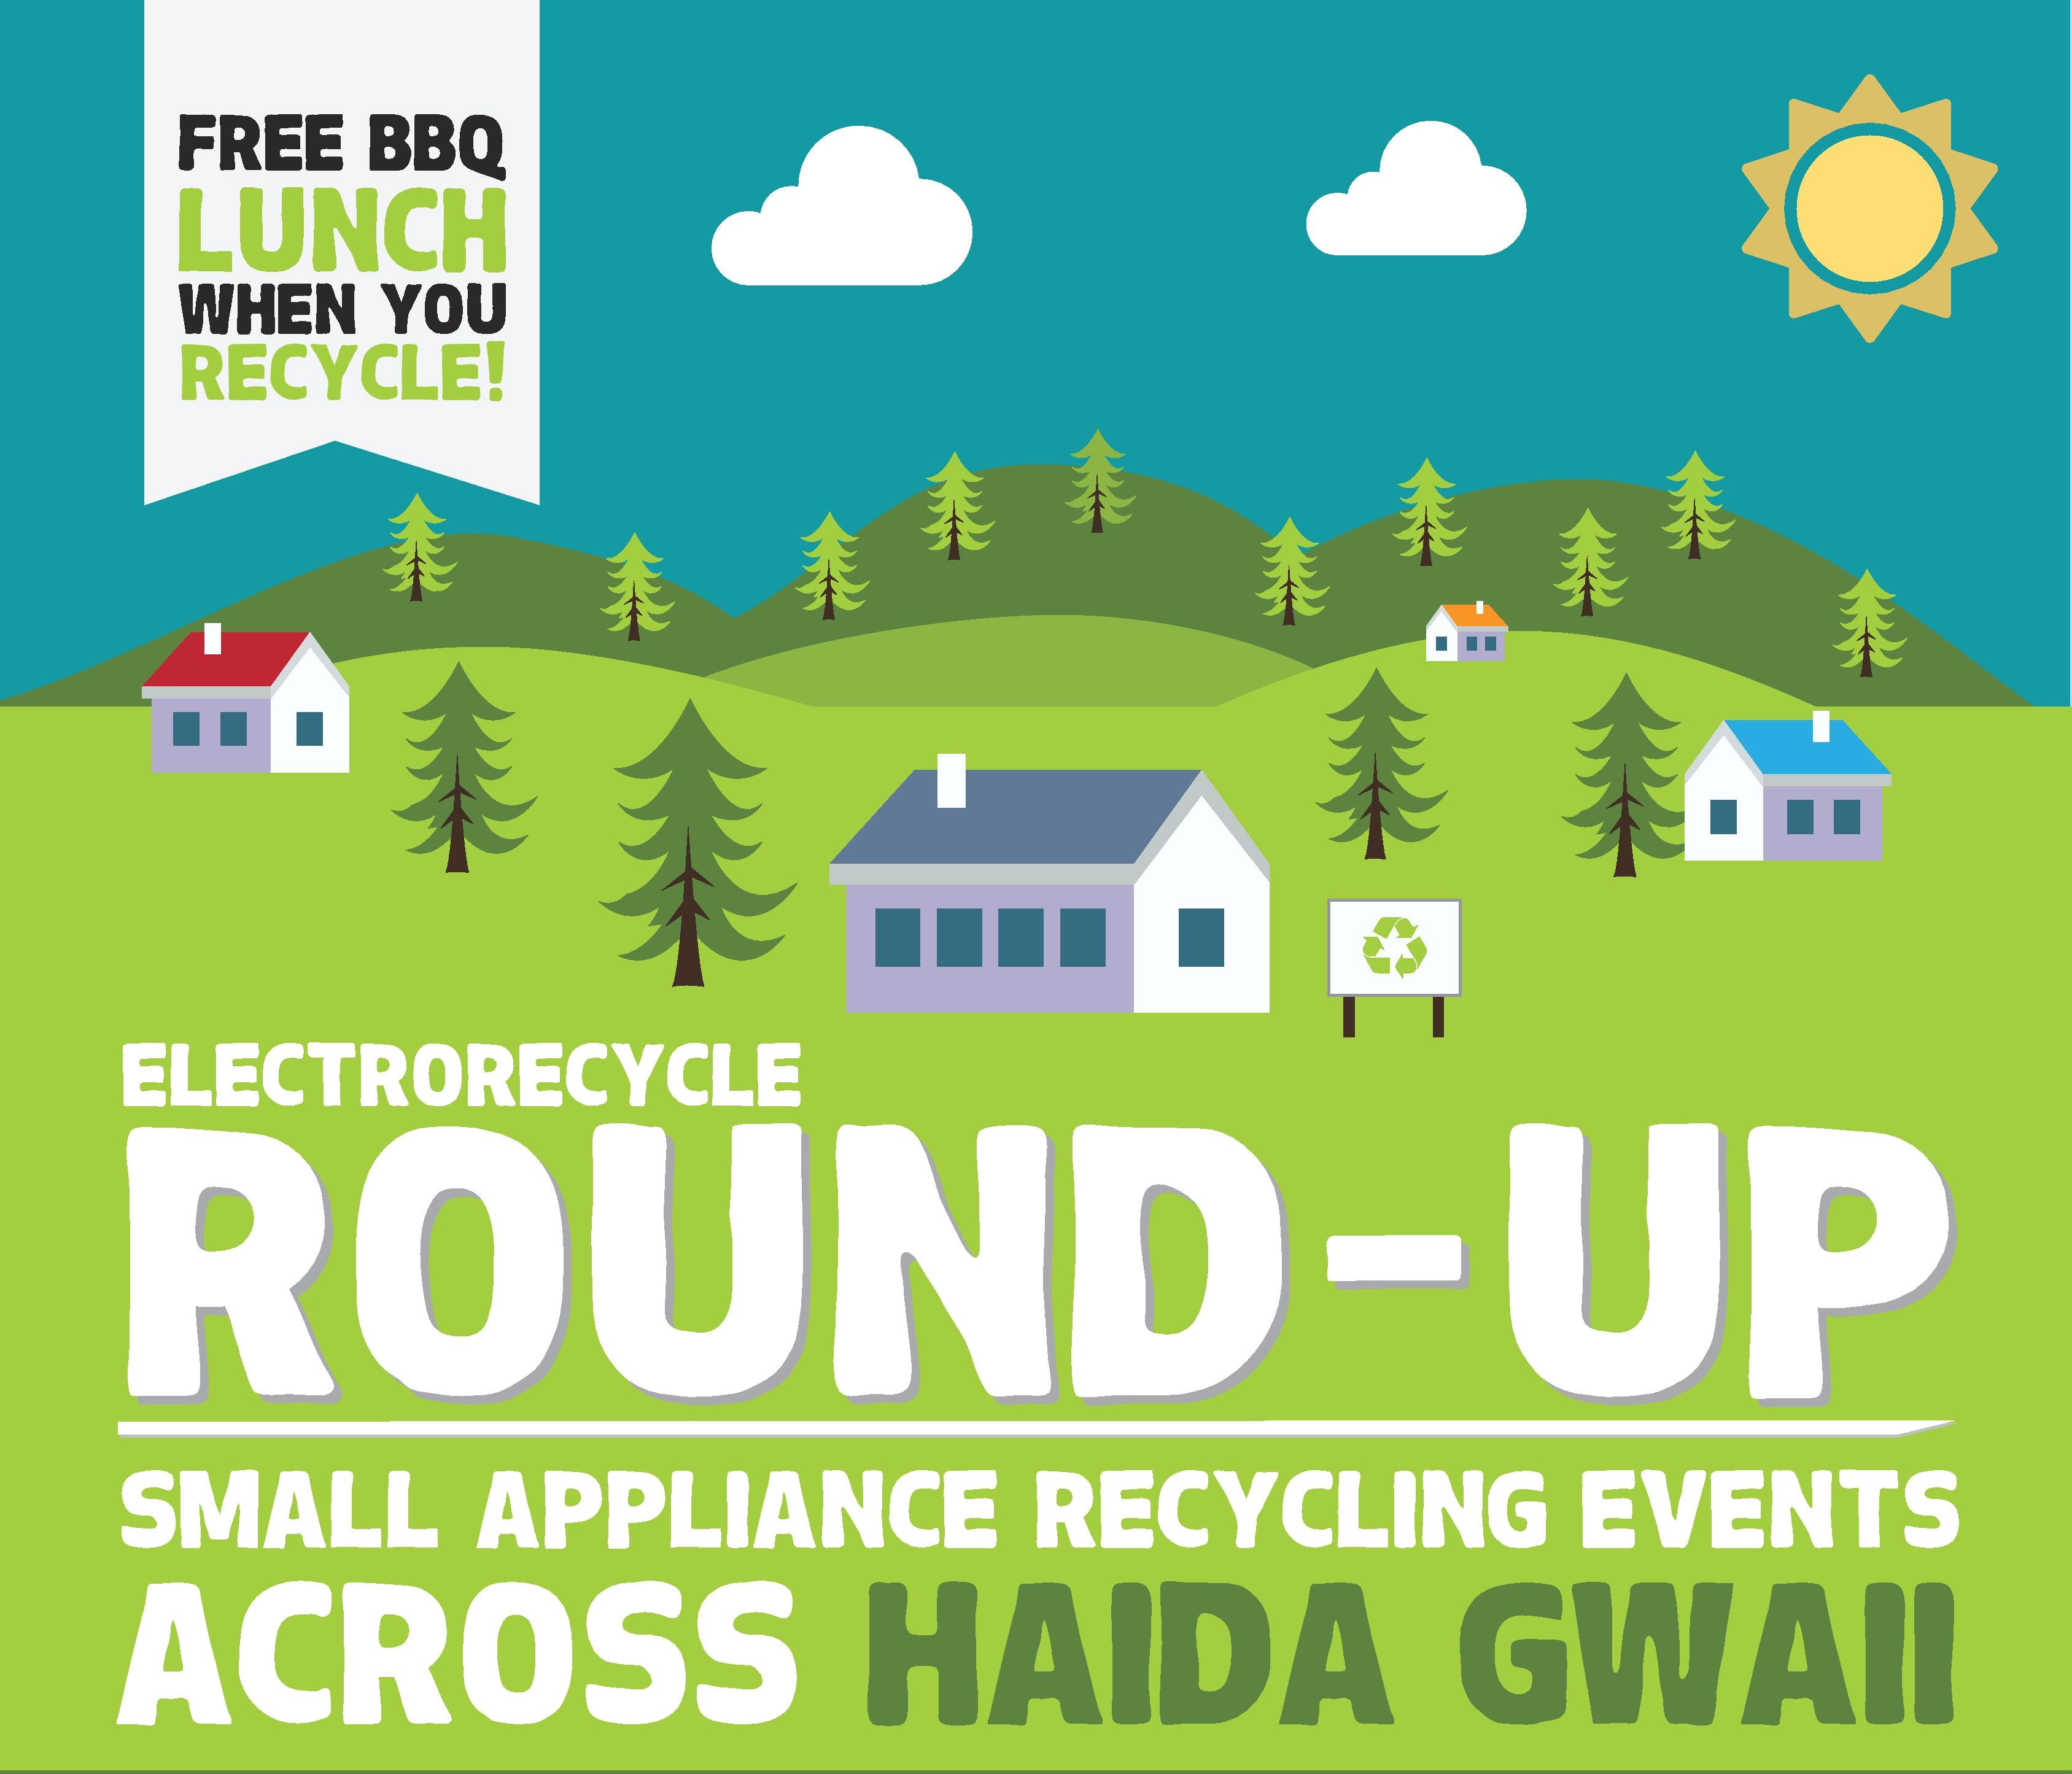 ElectroRecycle Round-up and BBQ - Masset